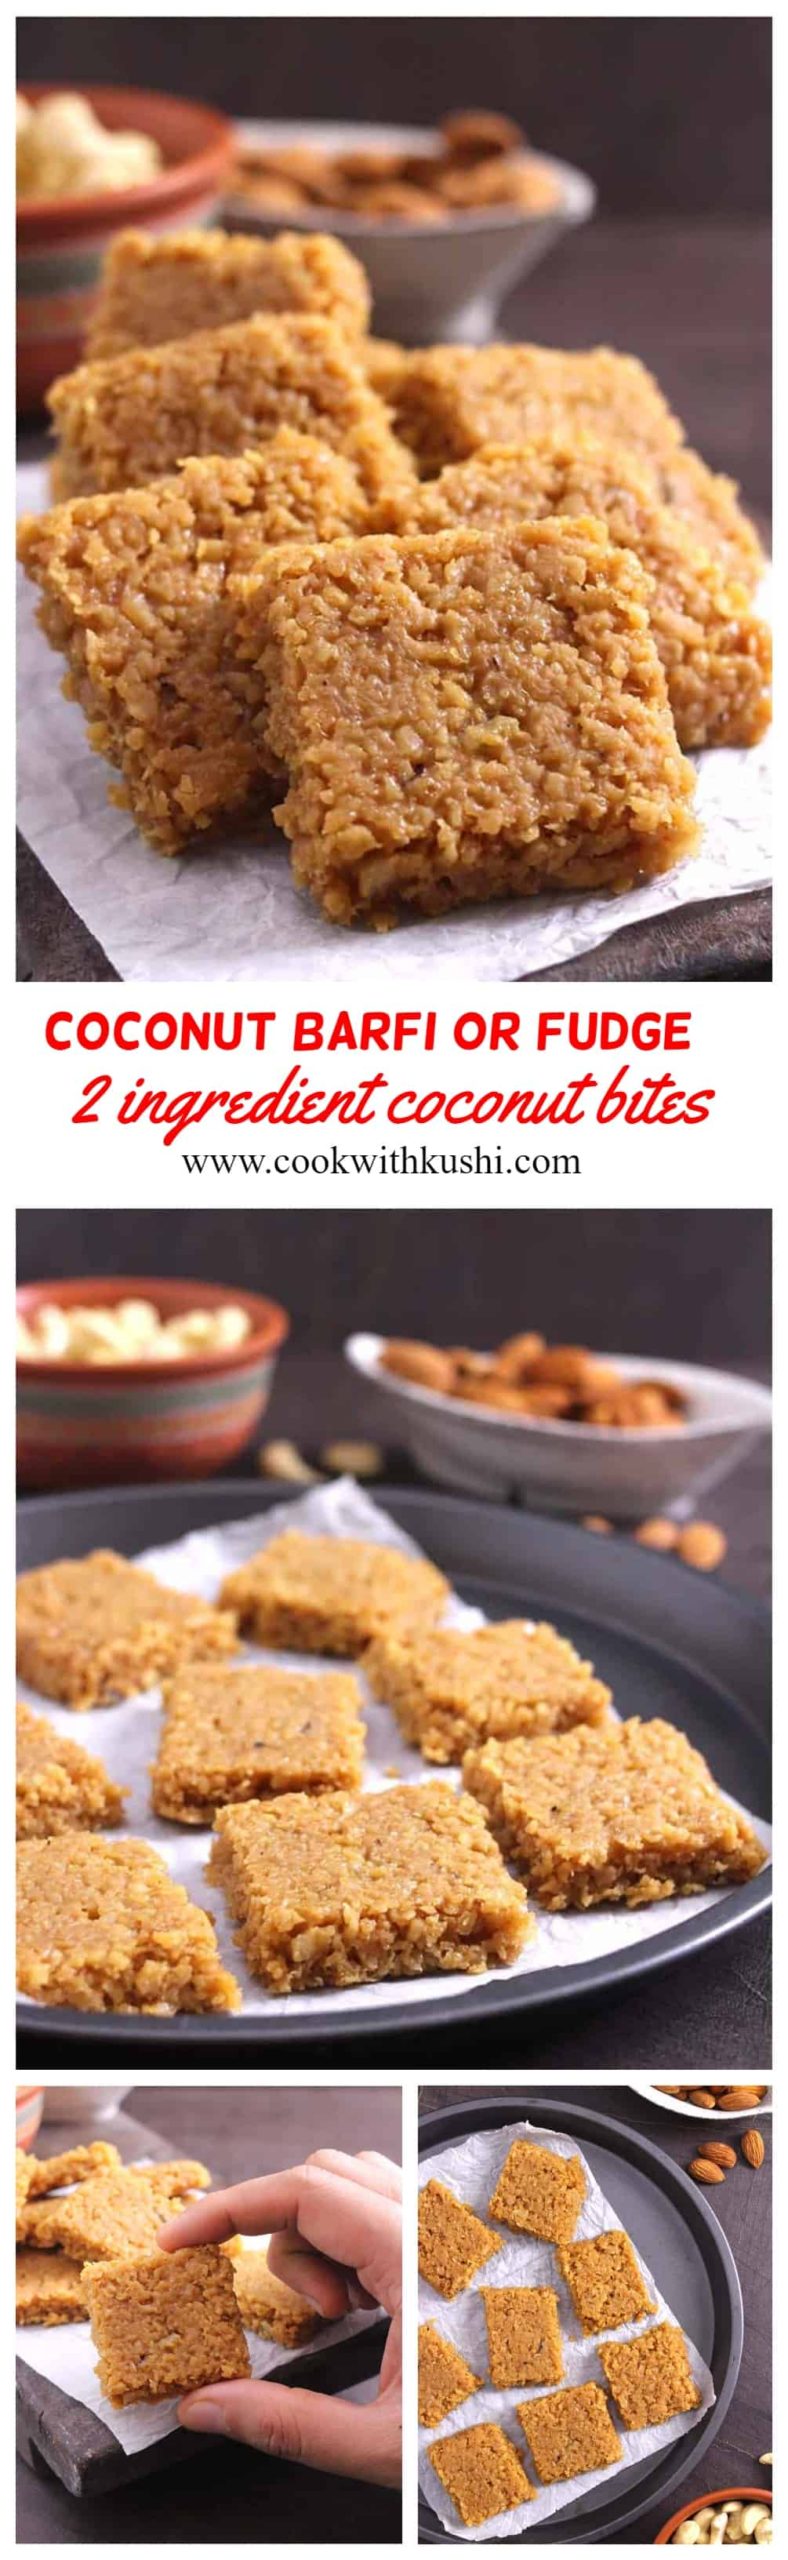 Coconut Barfi is a melt-in-mouth, flavorful, and addictive Indian sweet recipe prepared using just 2 ingredients in less than 30 minutes. #fudge #Nobake #desserts #Bites #nosugar #nomilk #vegean #vegetarian #Keto #paleo